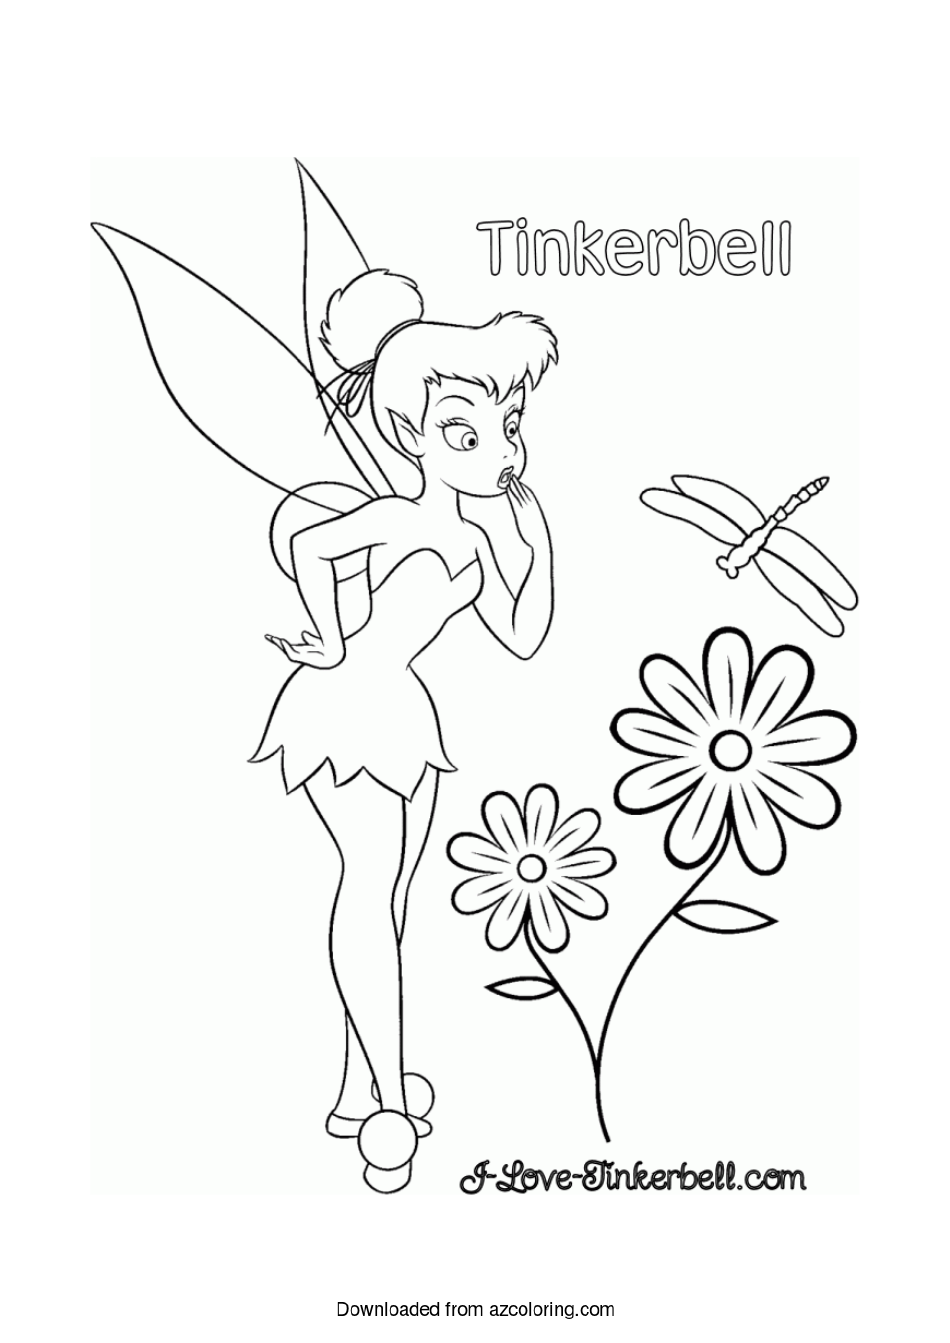 Sold at Auction: Tinkerbell - Original pencil drawing by Paul Banwer,  signed & dedicated, framed, 8 x 12 inches.